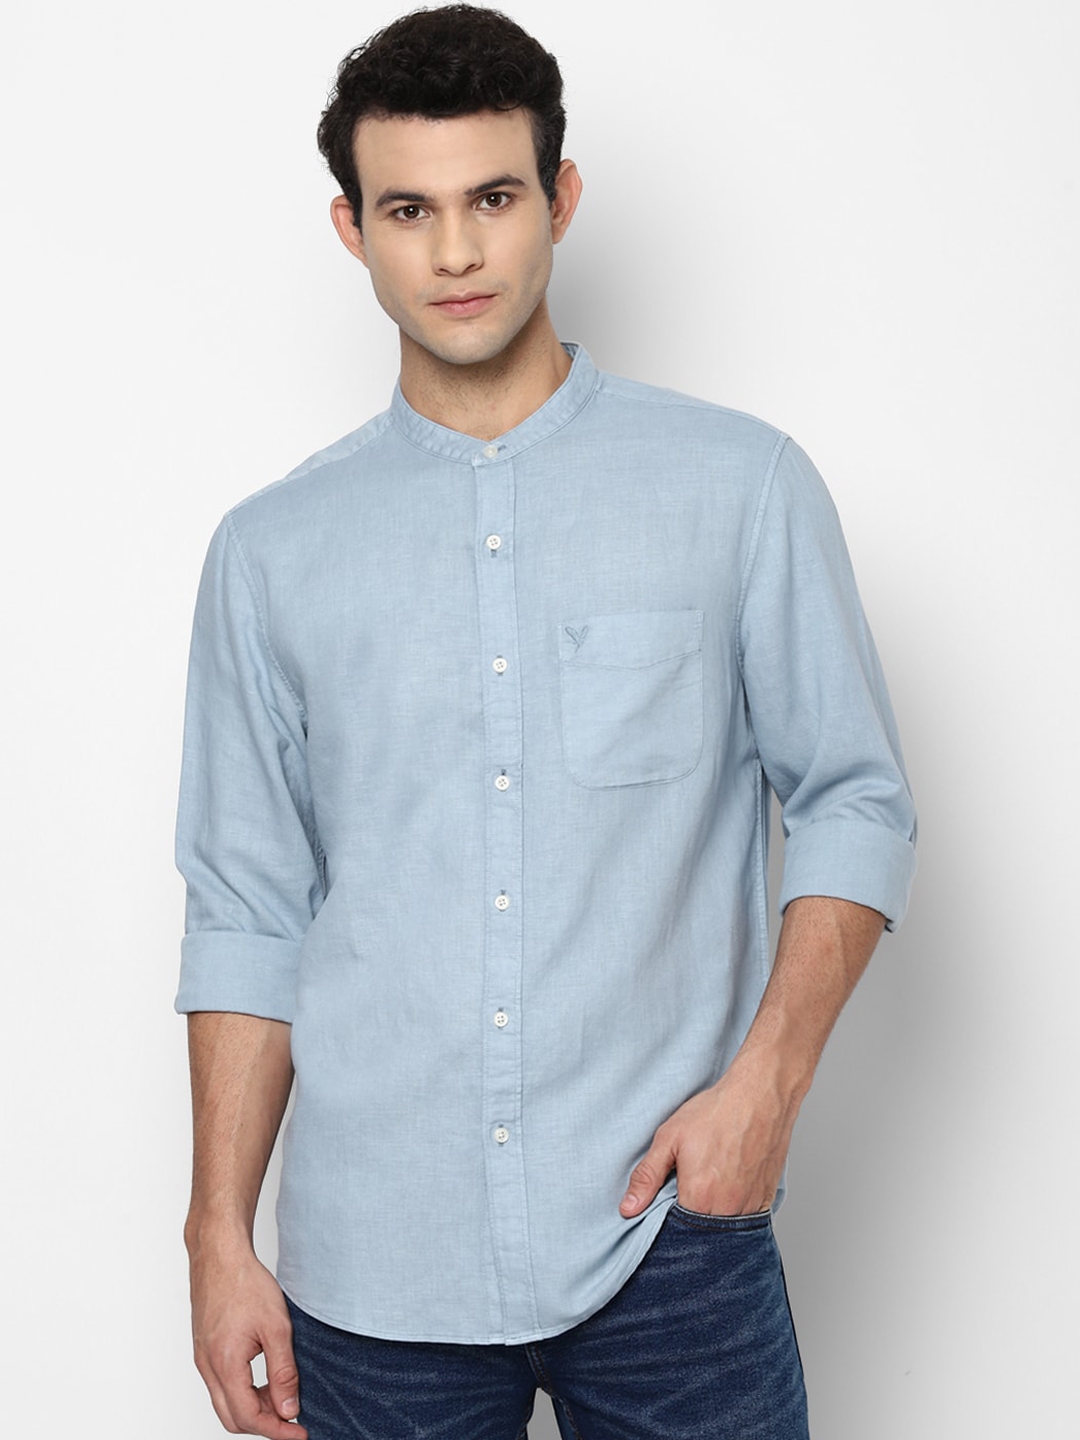 Buy AMERICAN EAGLE OUTFITTERS Men Blue Cotton Linen Casual Shirt ...